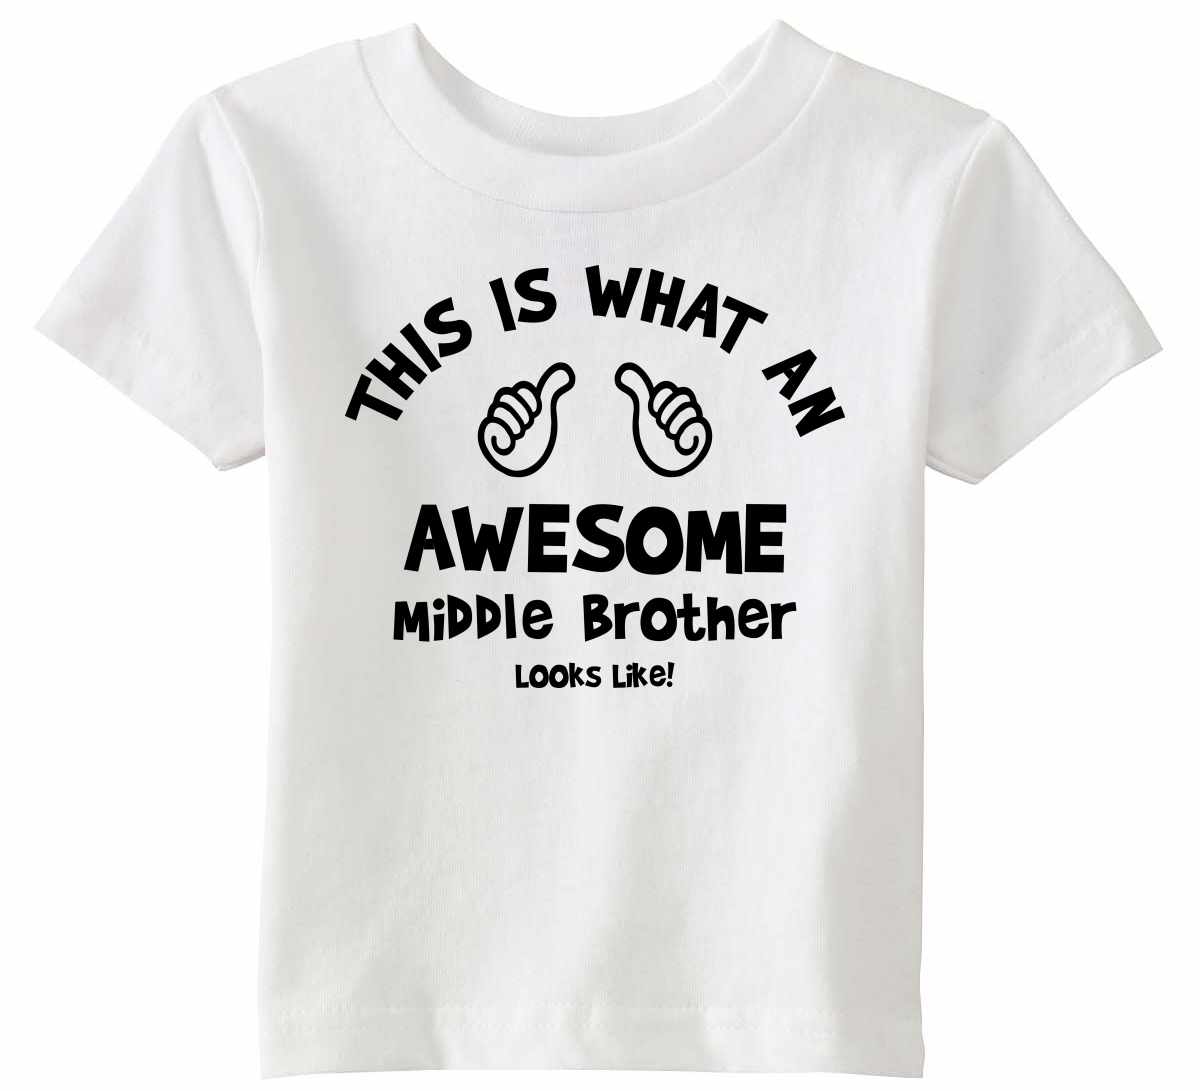 This Is What An Awesome Middle Brother Looks Like on Infant-Toddler T-Shirt (#1094-7)